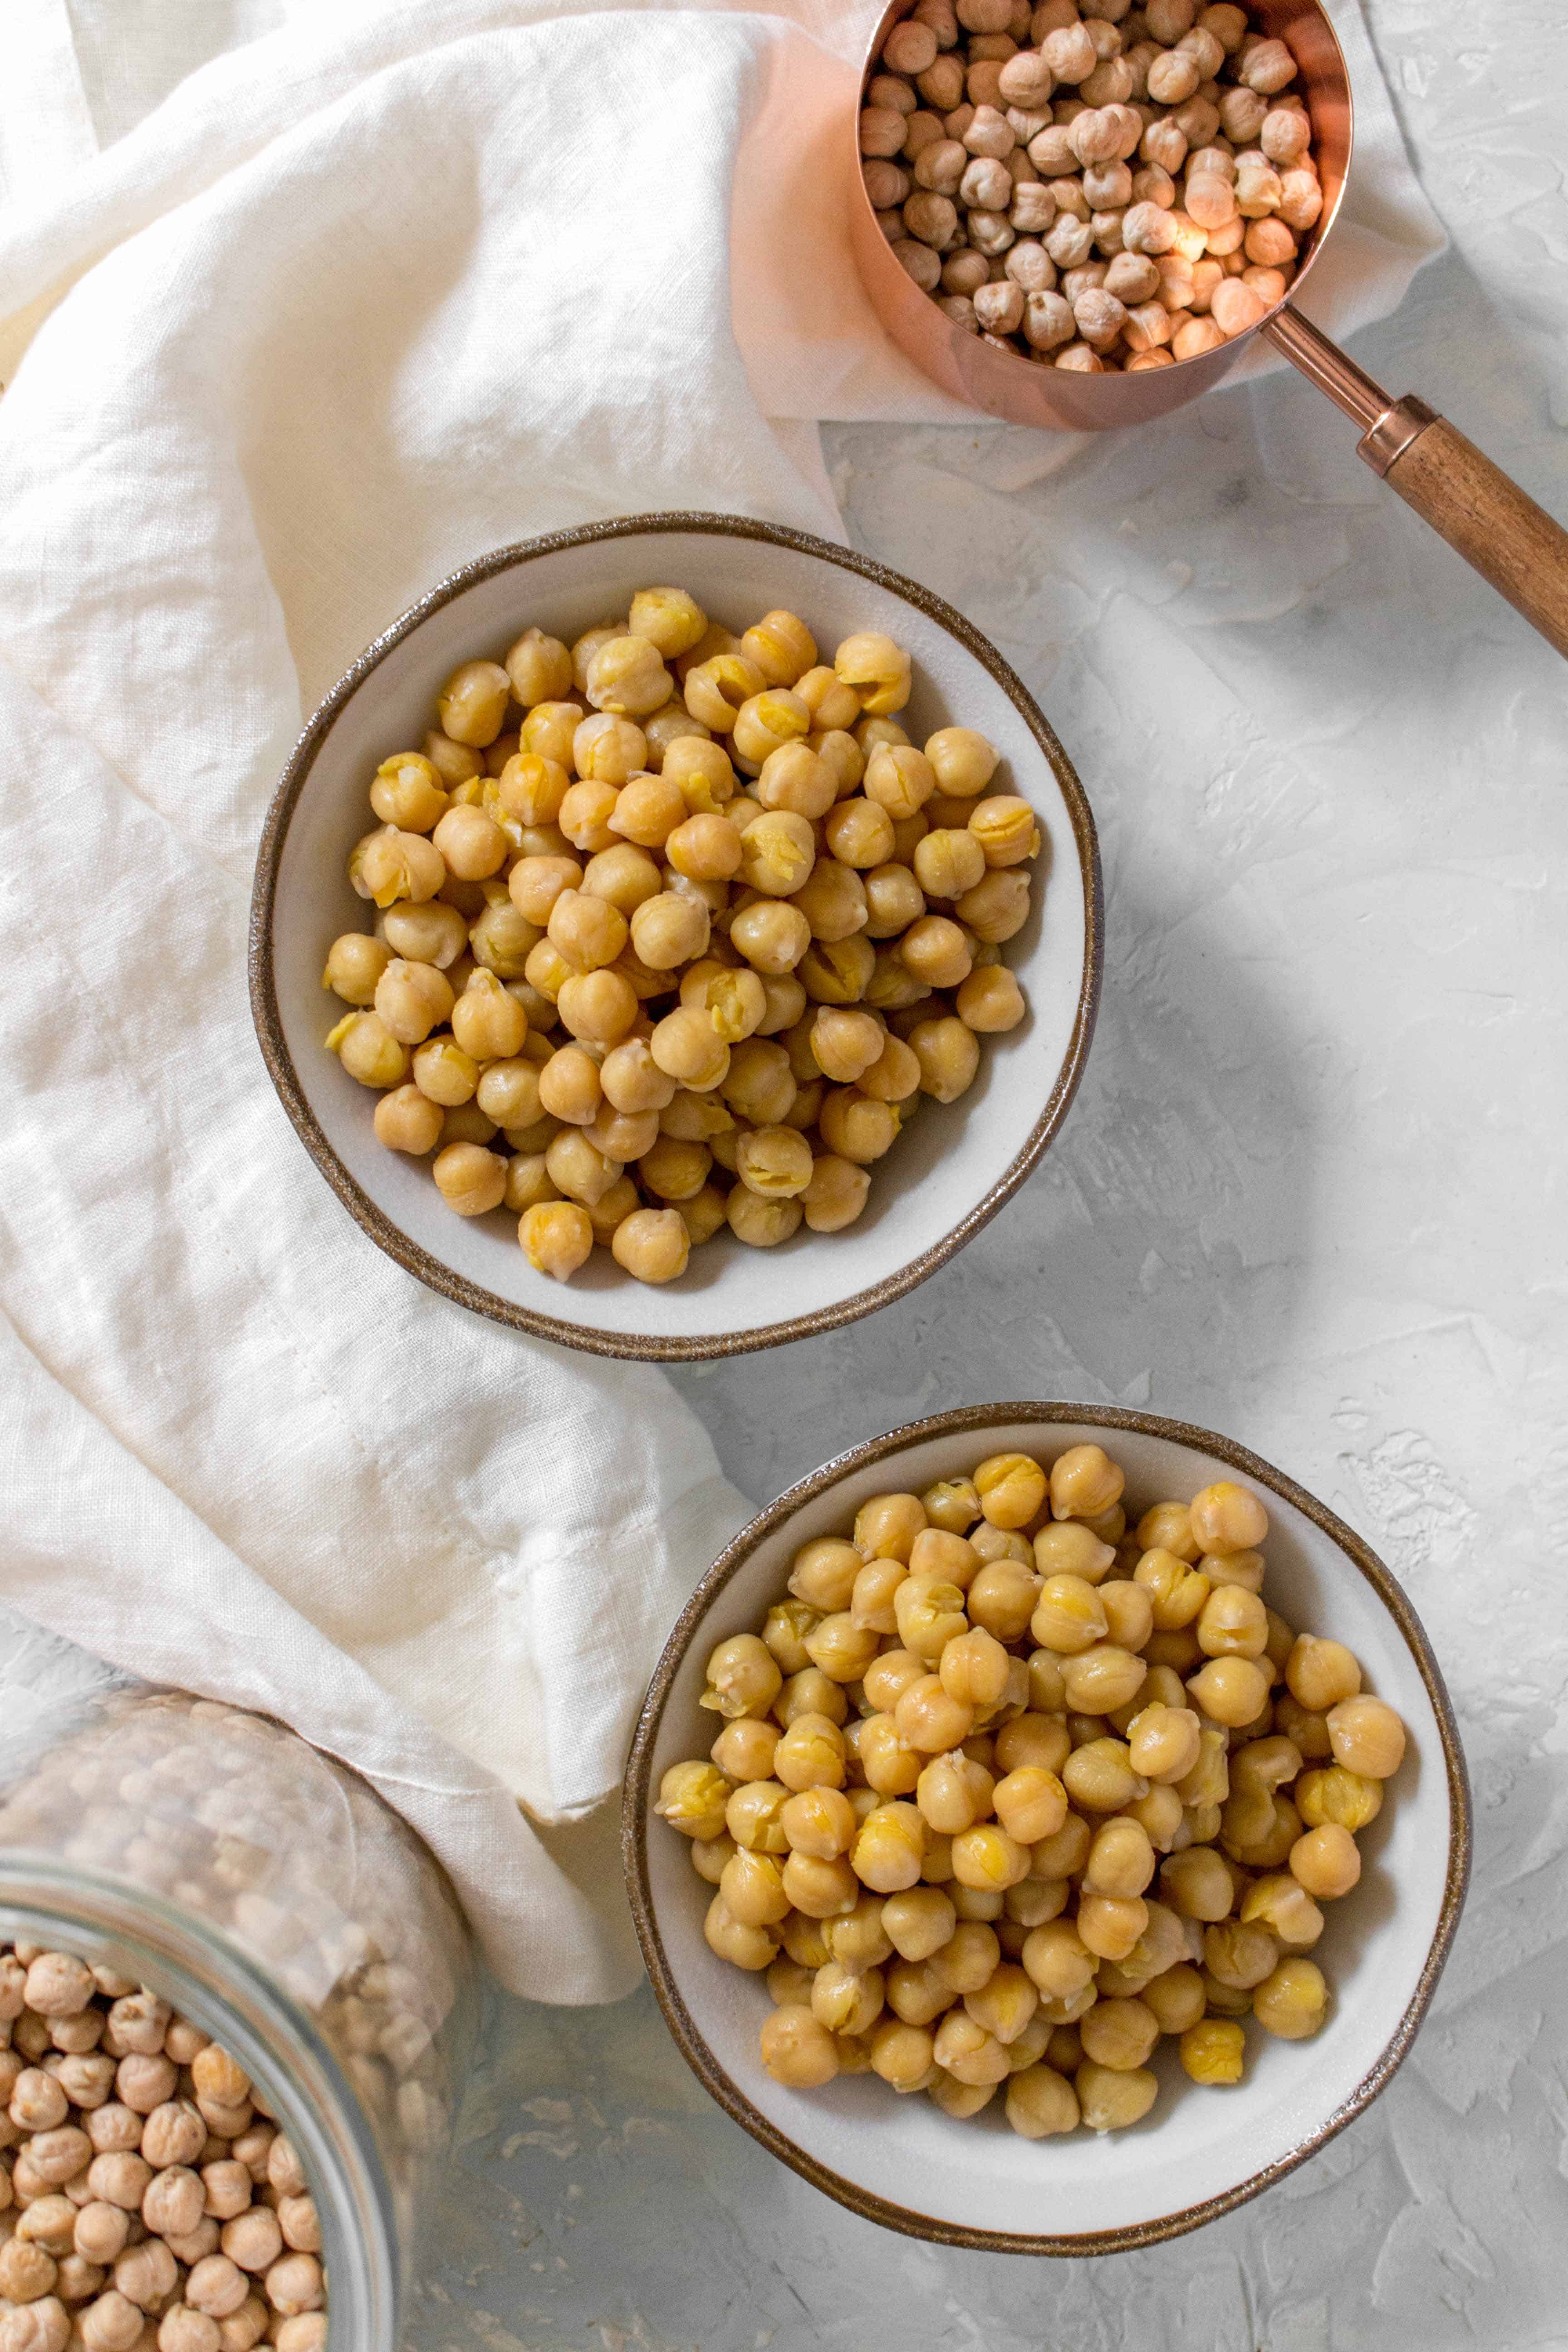 Hereâ€™s how to easily make chickpeas in an Instant Pot - a simple and quick method for cooking dried garbanzo beans in a pressure cooker!